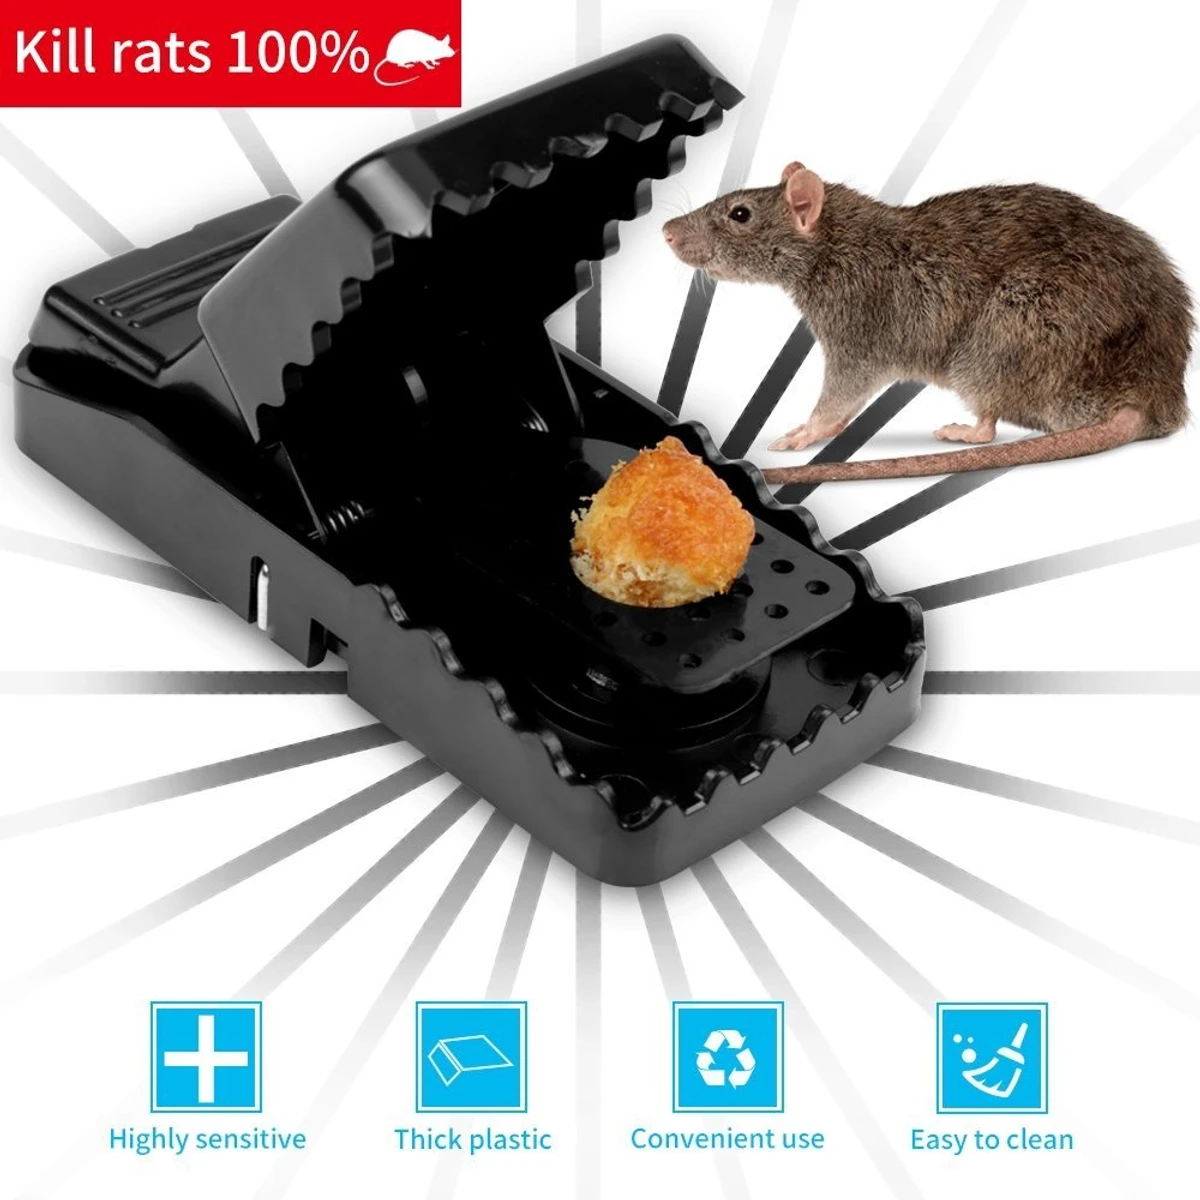 Mouse Killer Trap (5×3×3 inches)